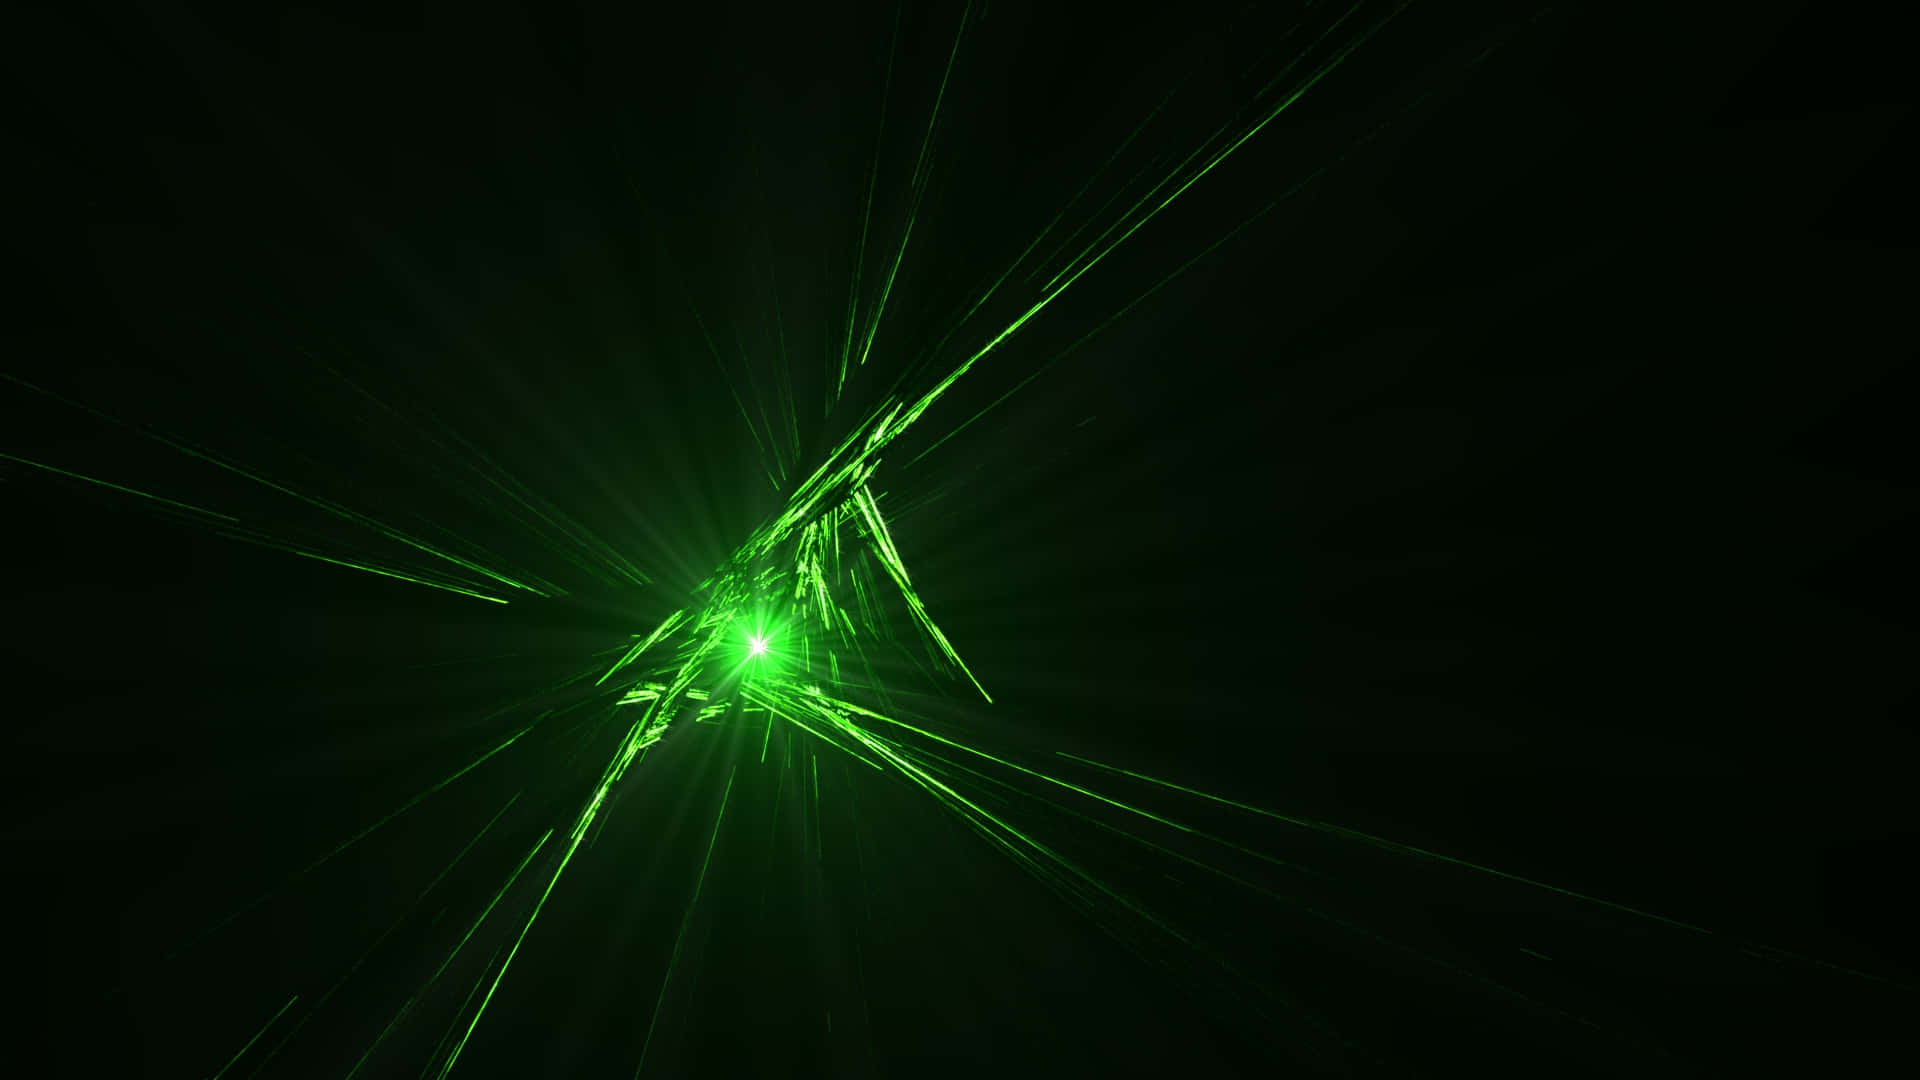 Fracture Glass Green Laser Light Picture